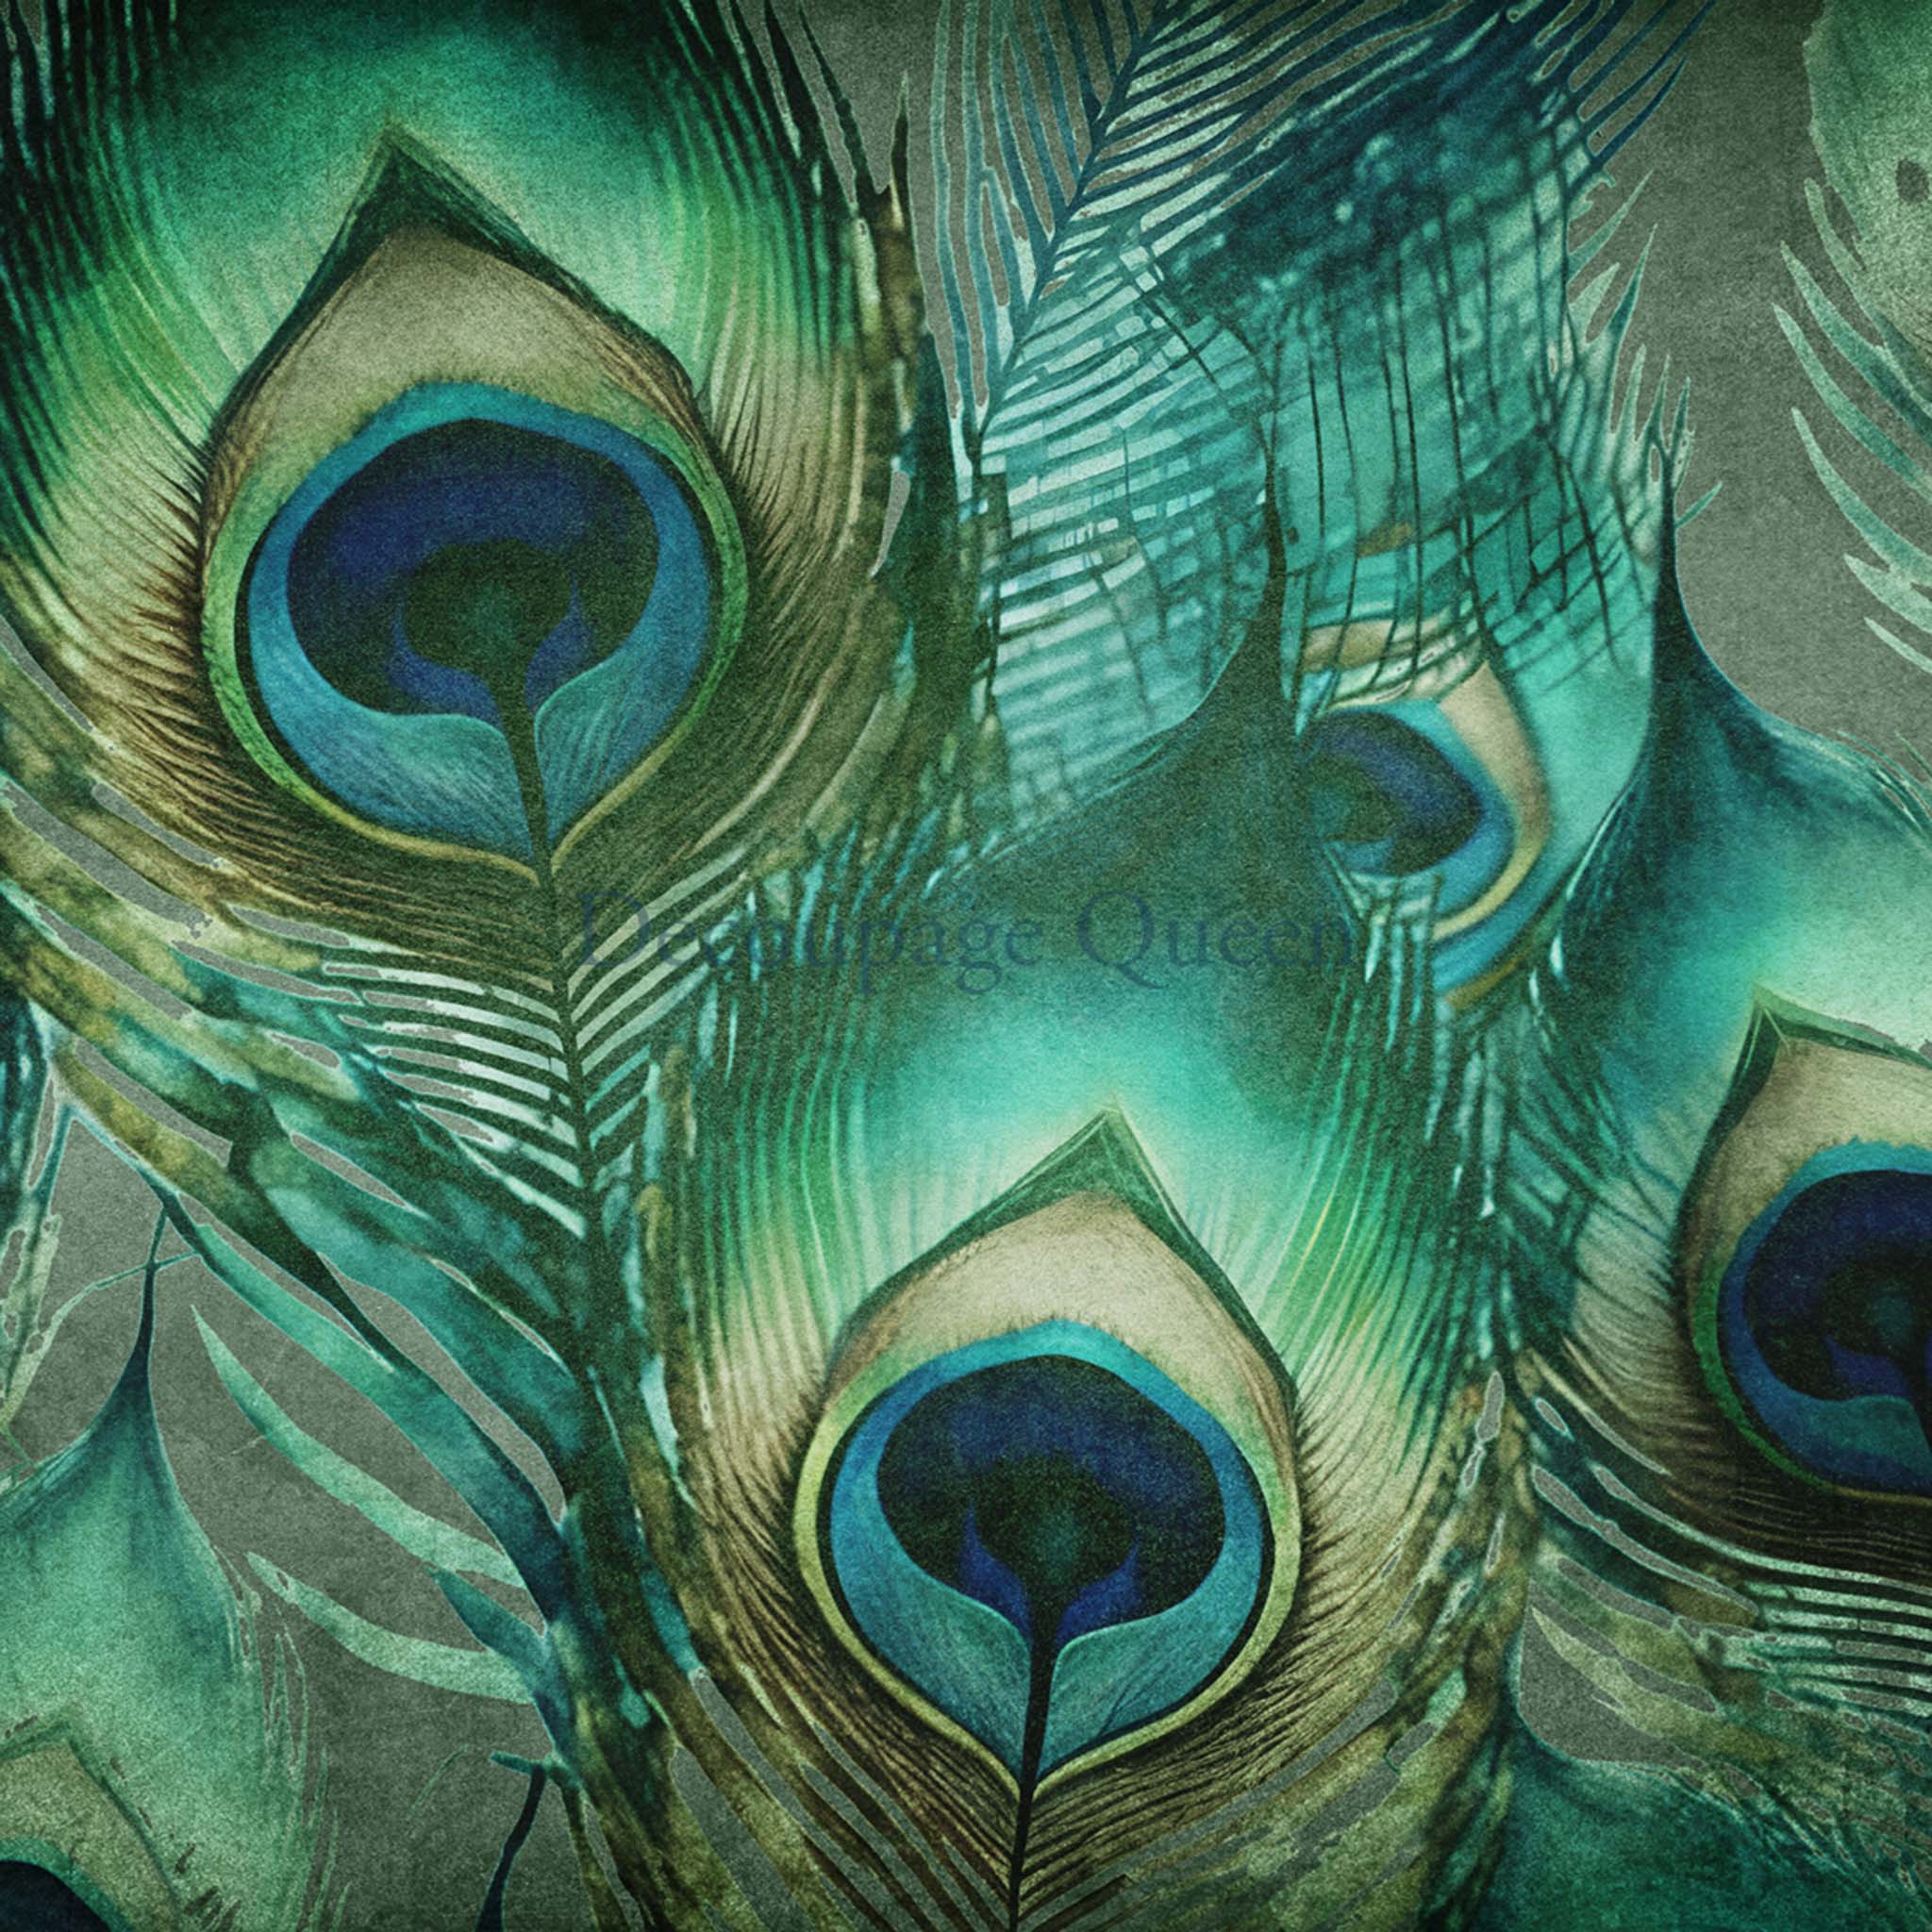 Close-up of an A1 rice paper design that features a close-up of peacock feathers in shades of jade, teal, and navy.